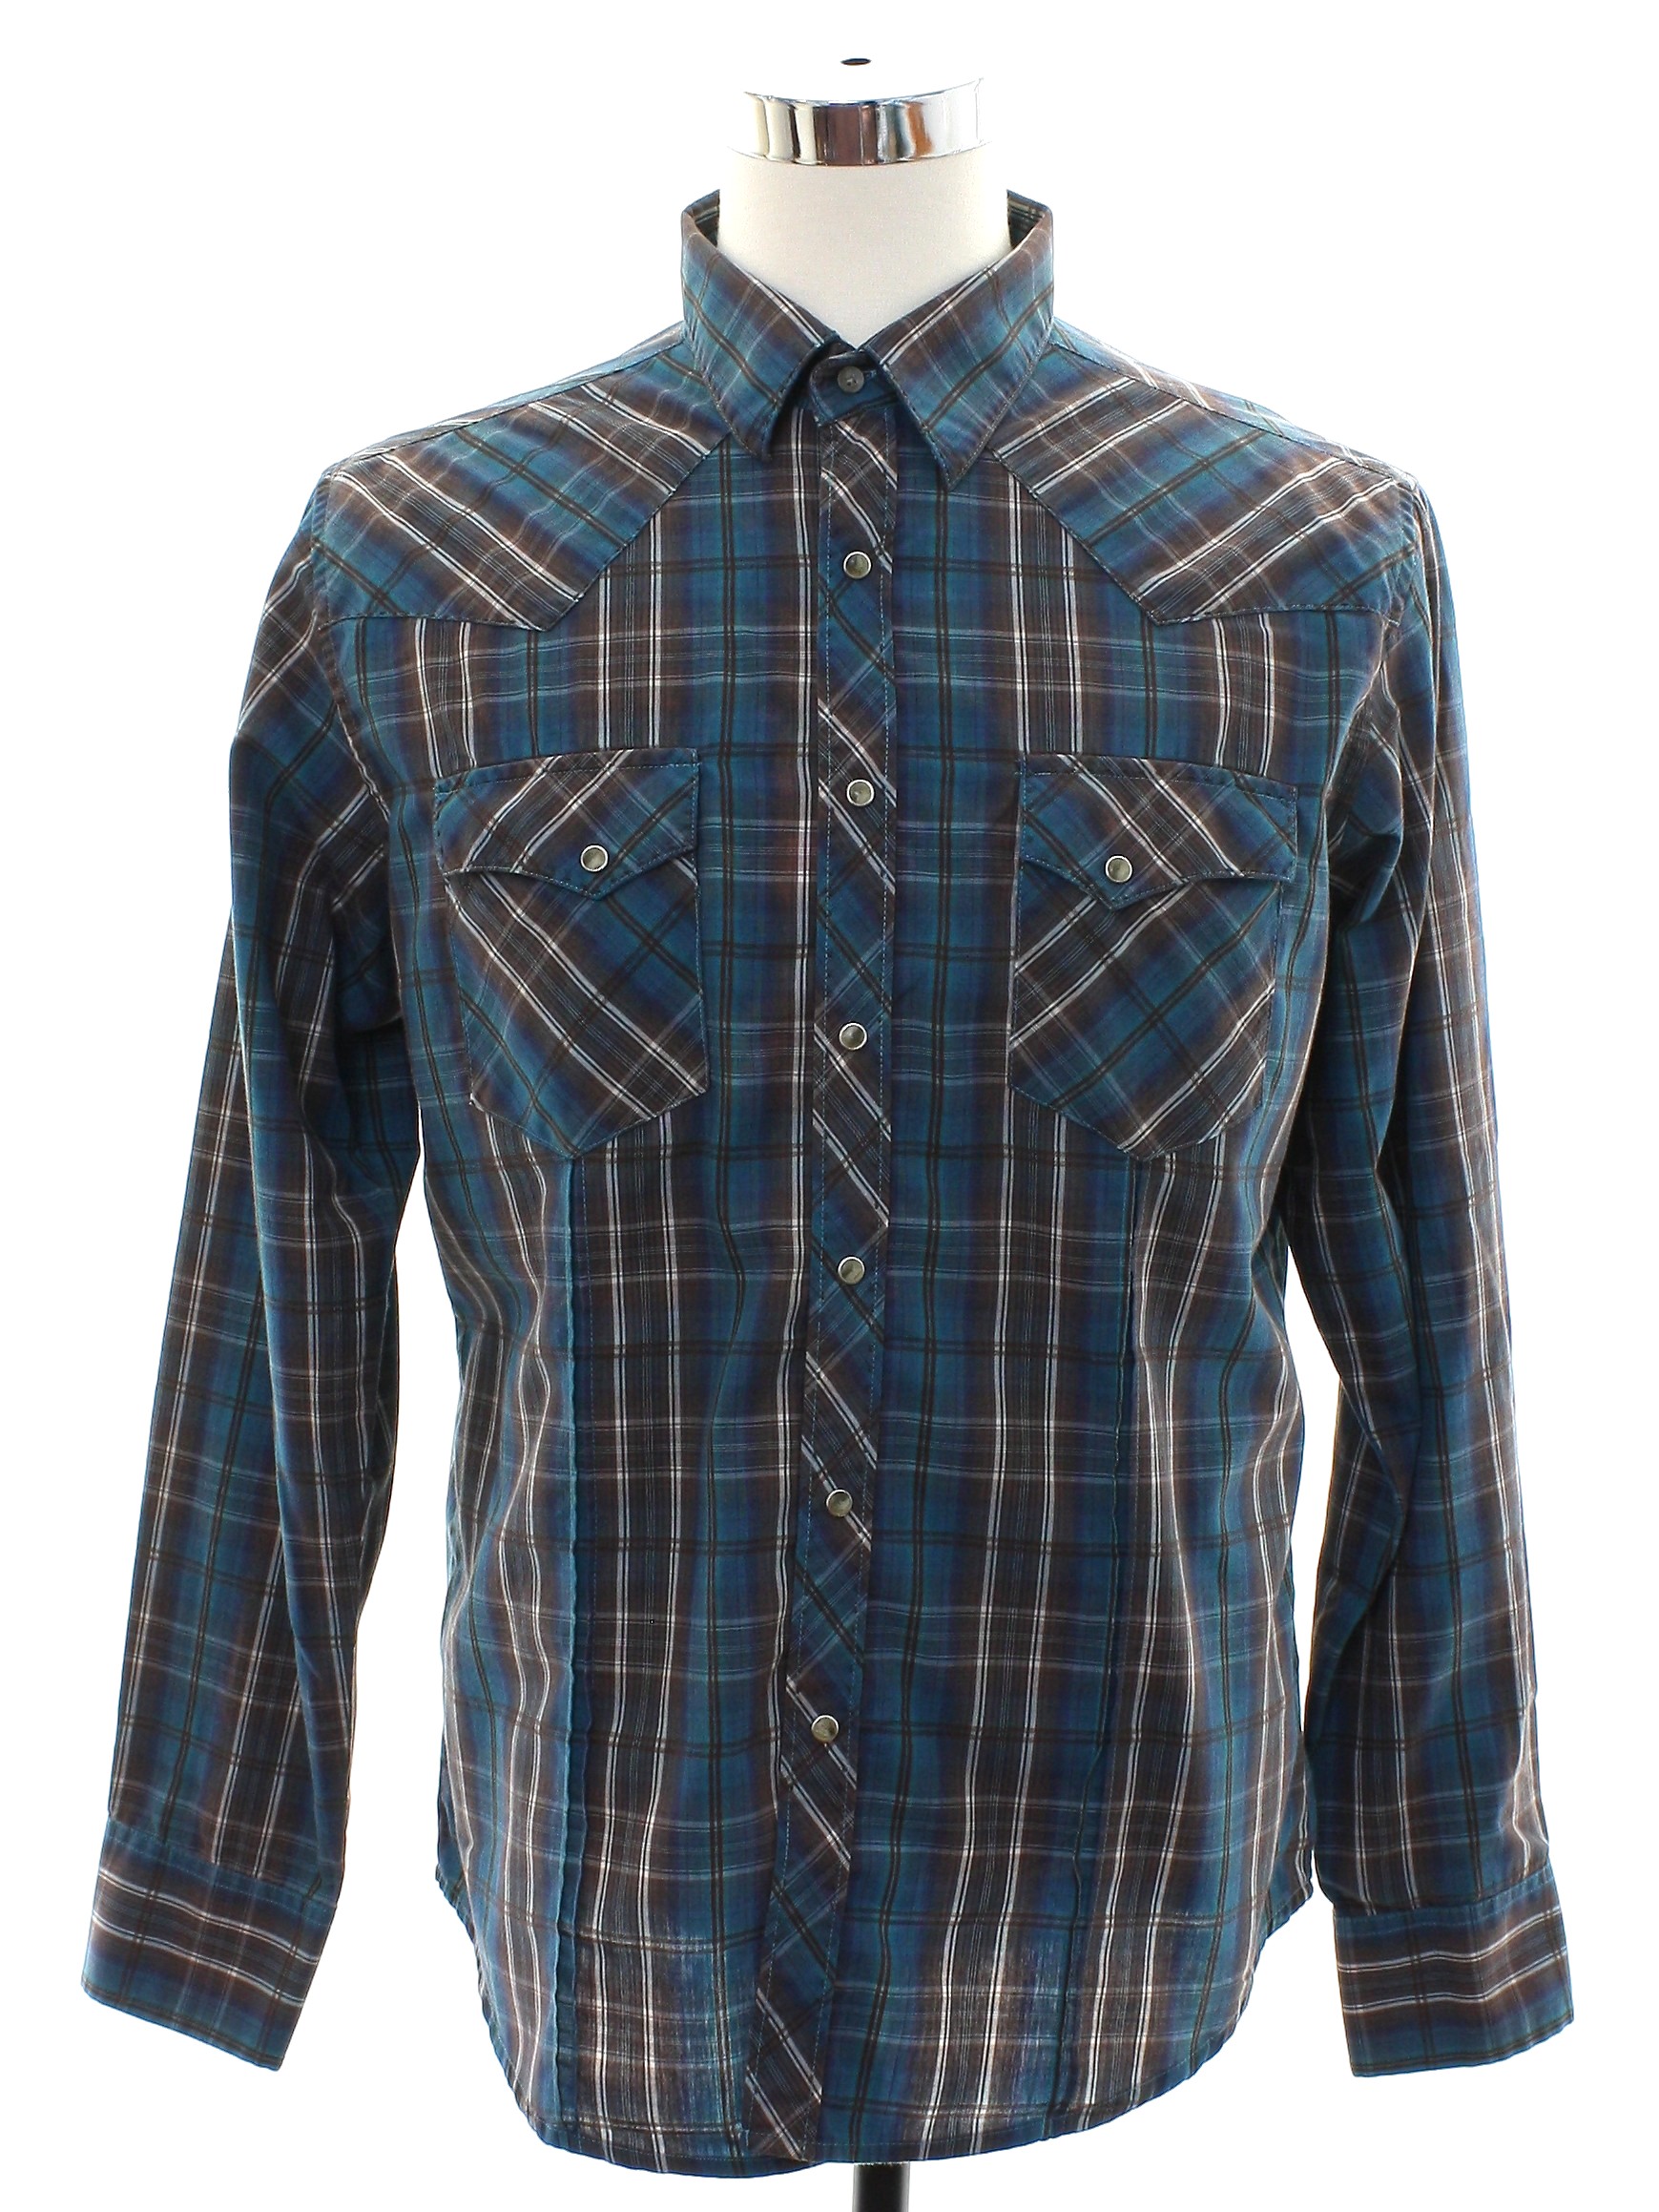 Western Shirt: 90s -Wrangler- Mens dusty teal, brown, white, and blue ...